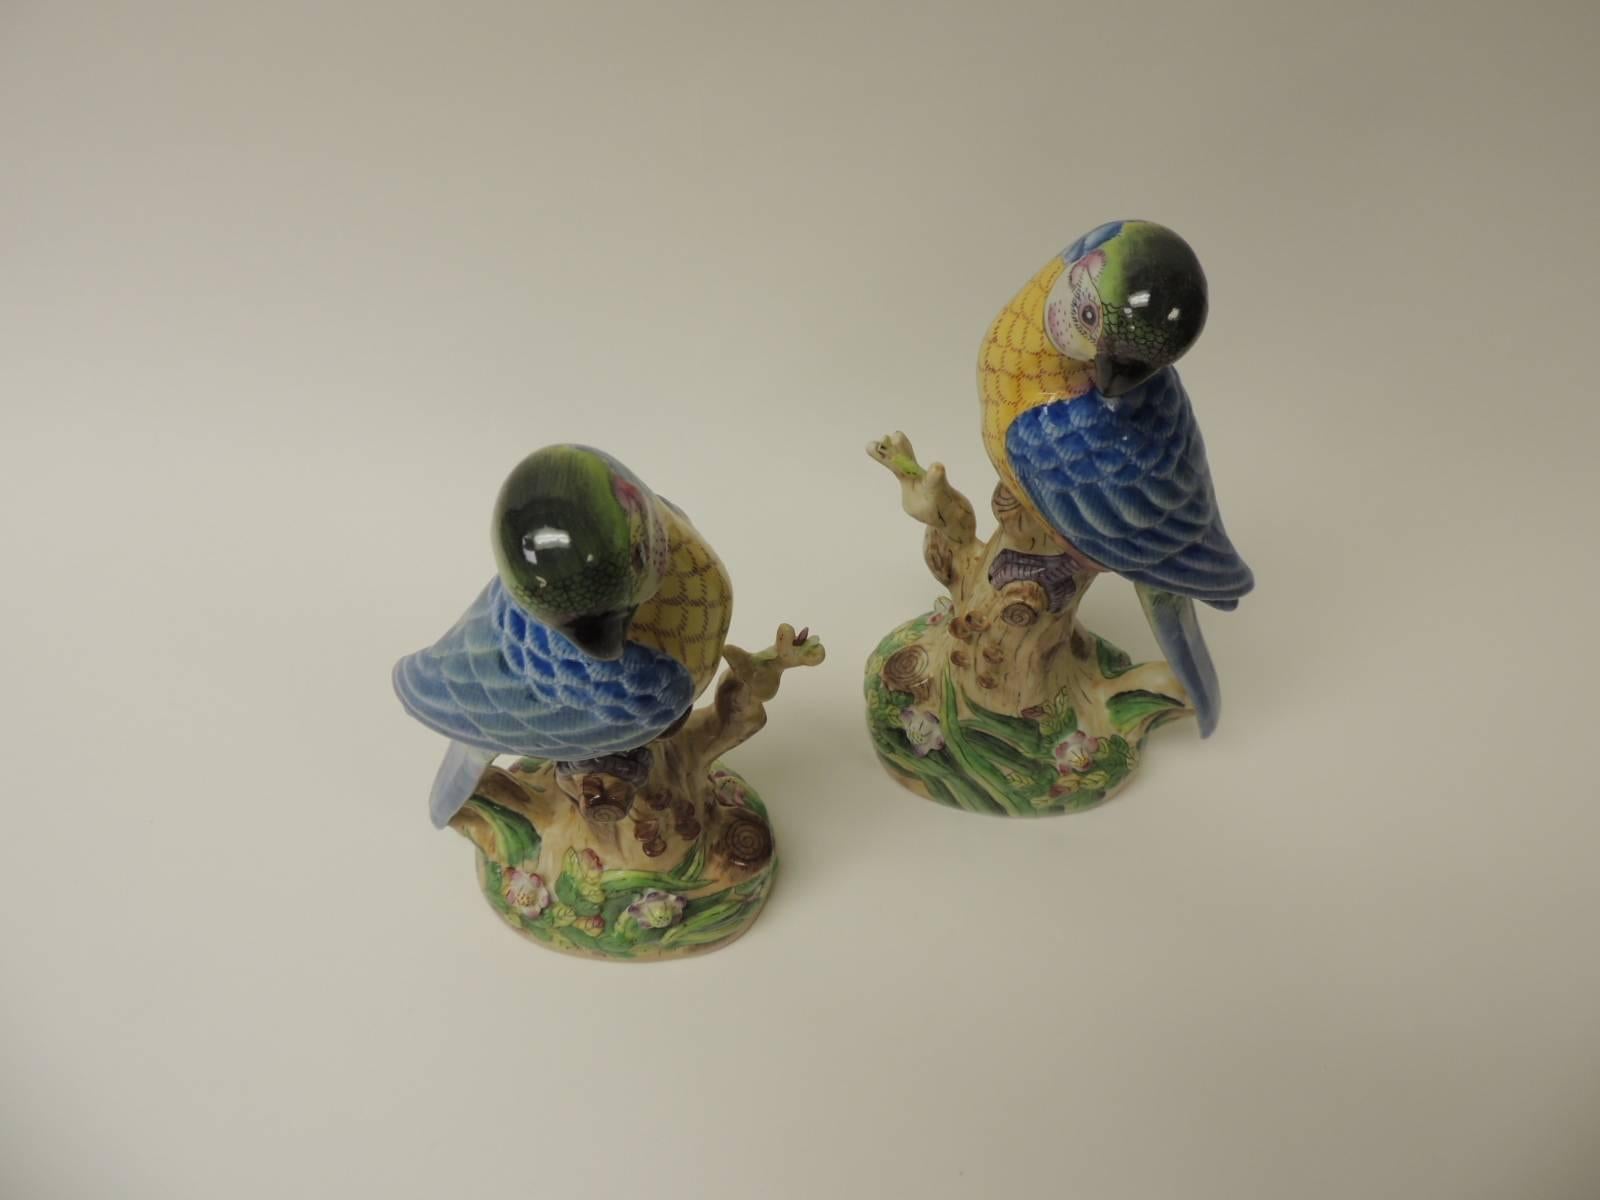 Pair of Vintage Chinese Export hand-painted parrots
Pair of intricate hand-painted detailed ceramic Chinese Export parrots. The flowers, the tree trunks and the birds have a real life feel. In shades of yellow, blue, pink, green, purple and black. 